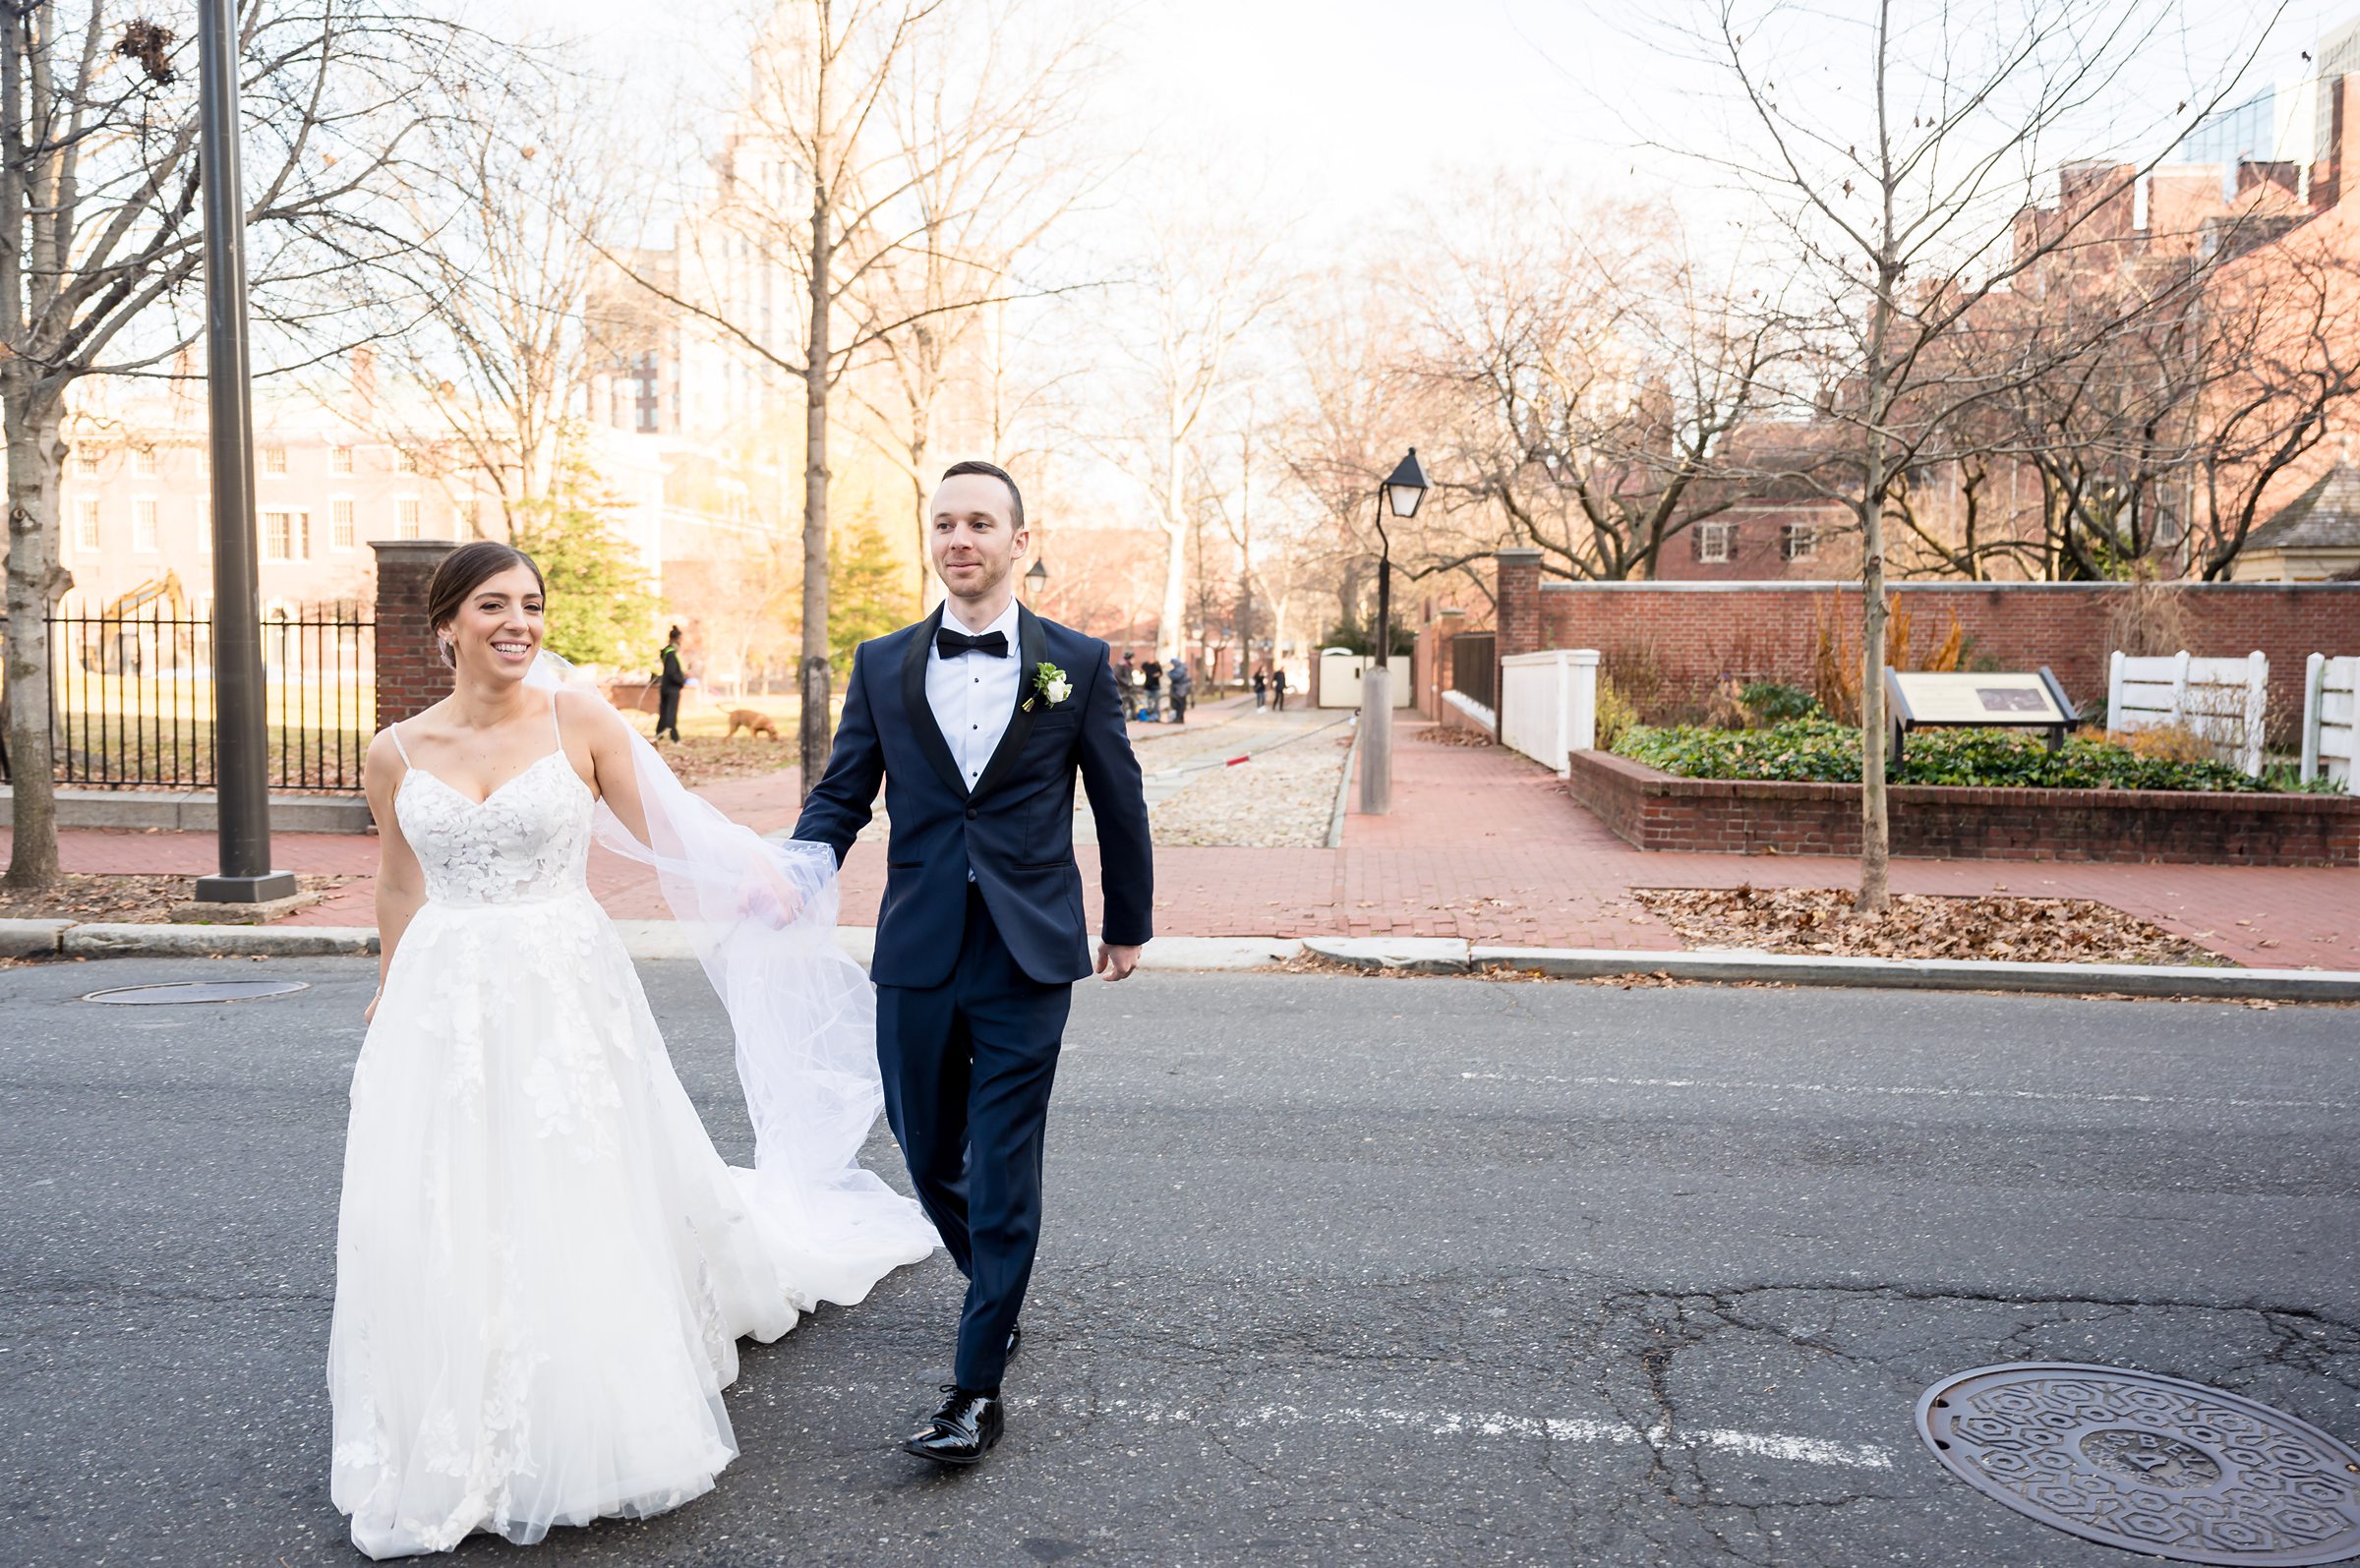 A bride and groom walking down the street in front of a building, captured by Lilah Events.